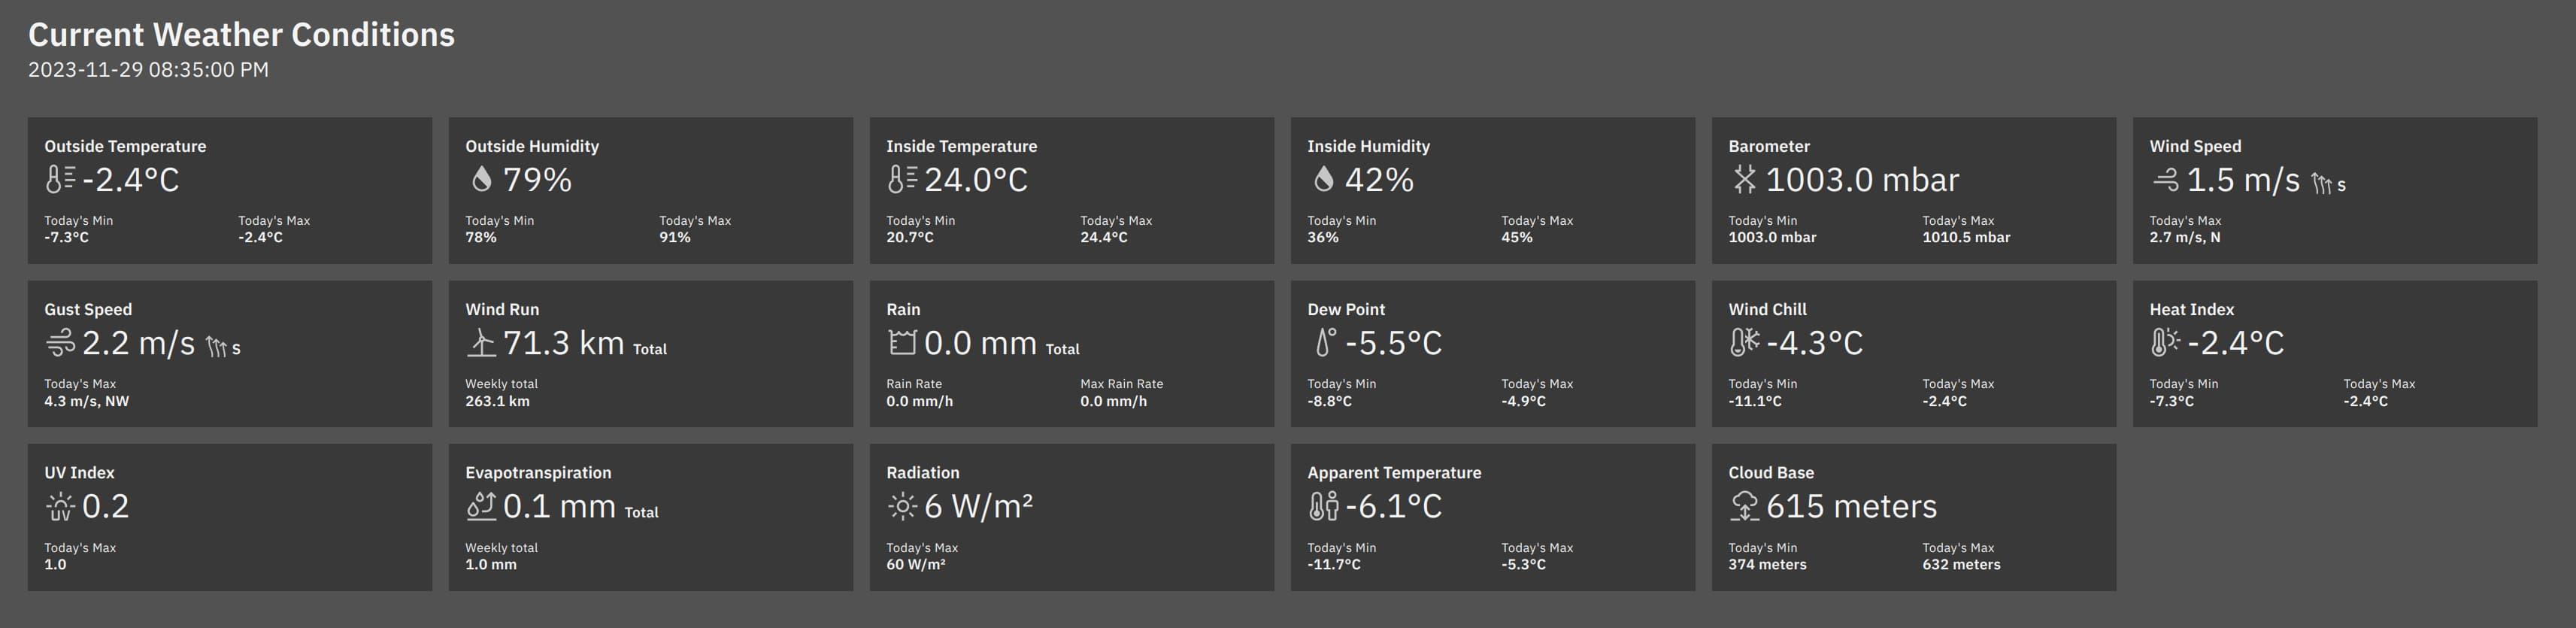 A current weather conditions dashboard, showing 17 different cards with datapoints like temperature, humidity, rainfall, wind, solar radiation, and others